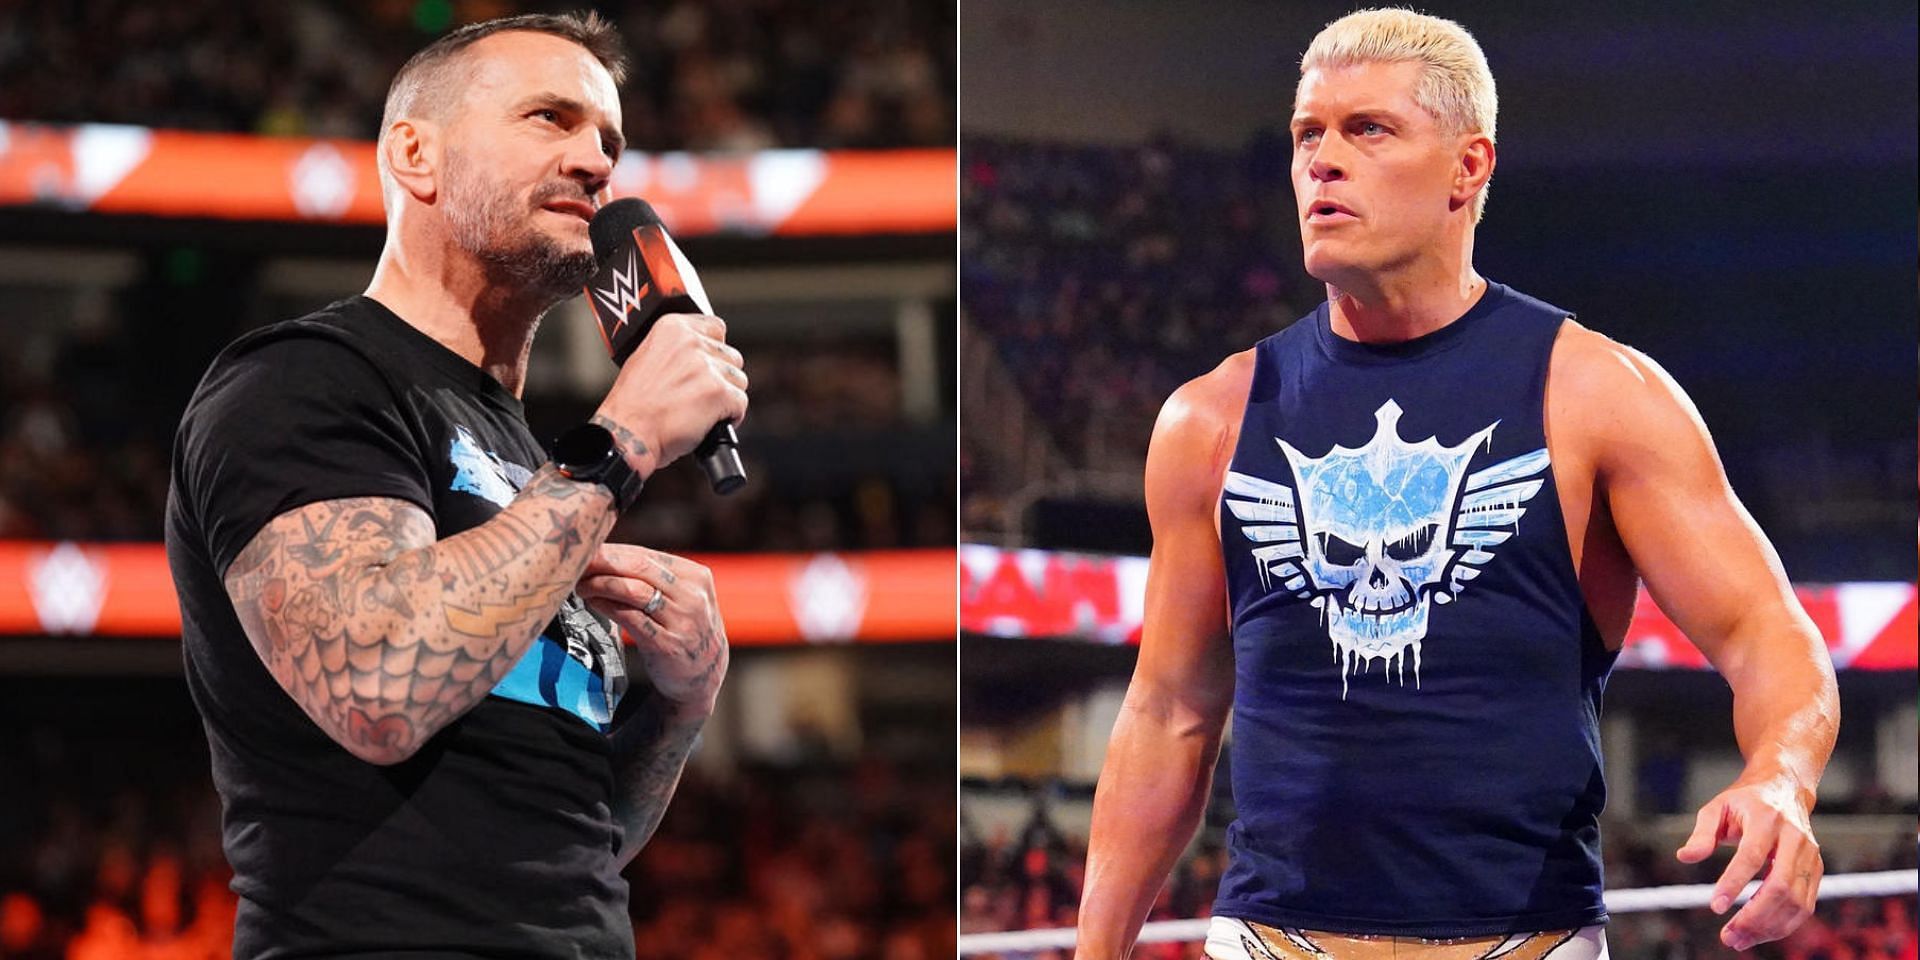 Cody Rhodes and CM Punk will be in the Rumble